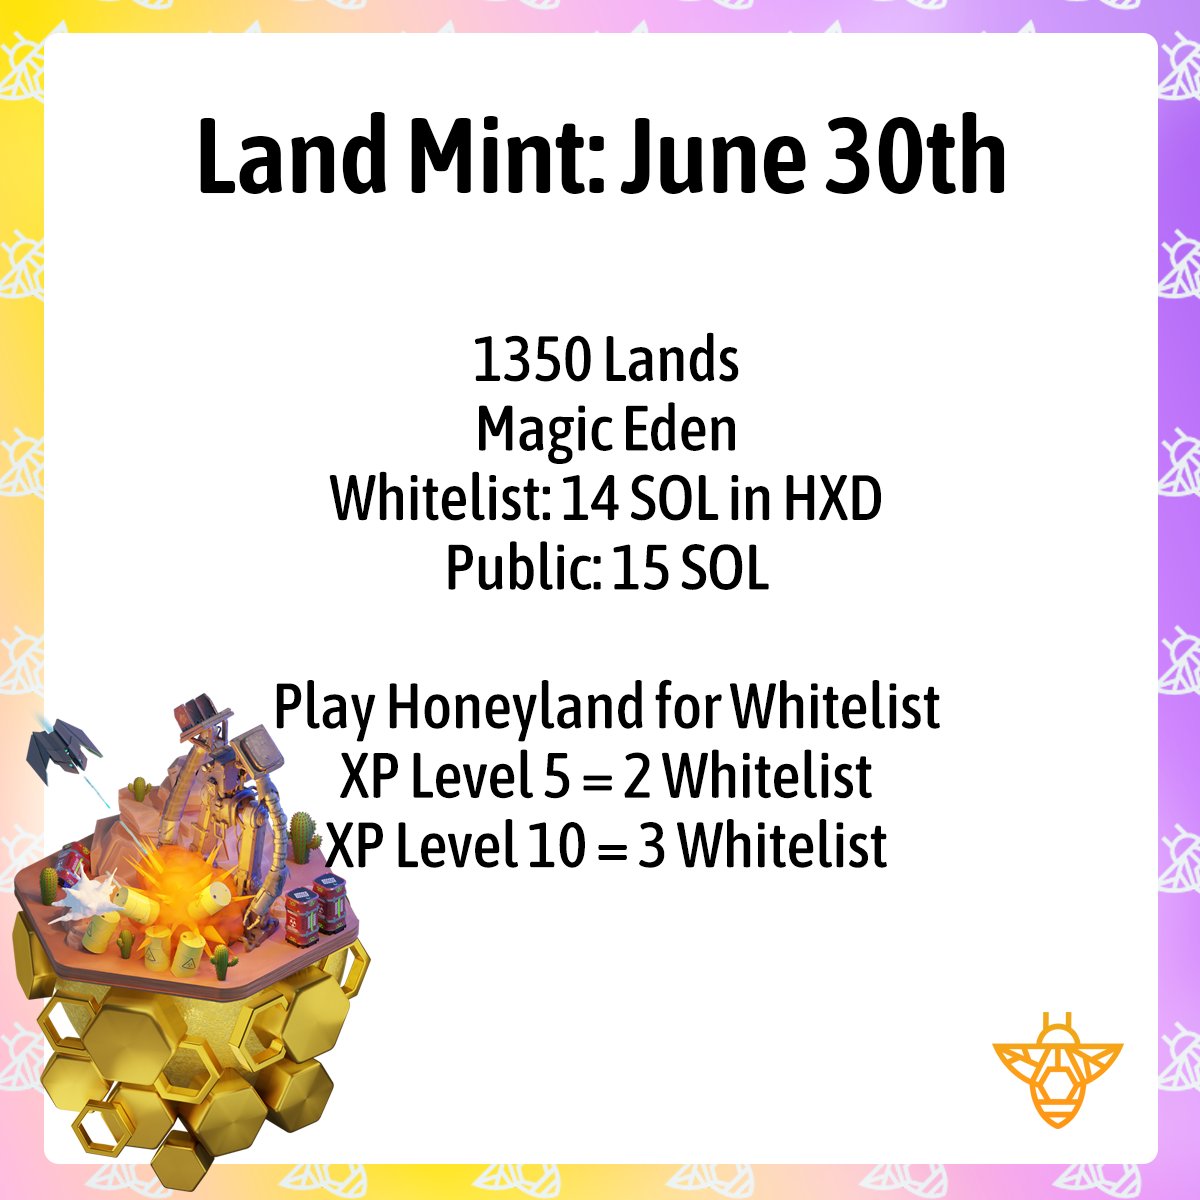 🐝LAND MINT JUNE 30TH 🐝

The second half of Universe 1 lands will mint on June 30th on @MagicEden!

1350 lands. Earn whitelist by playing Honeyland. Whitelist mints in HXD.